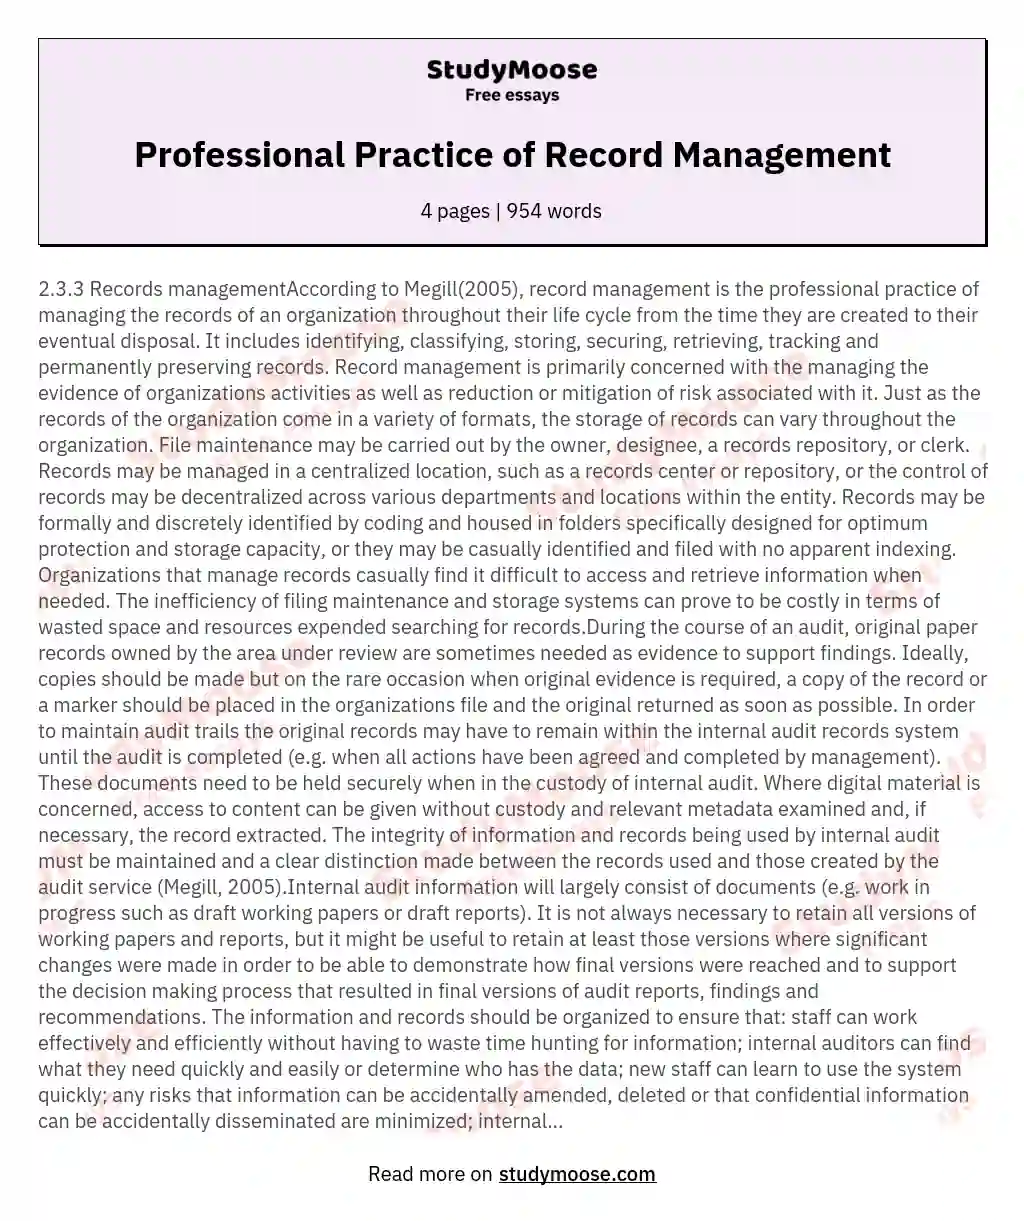 Professional Practice of Record Management essay